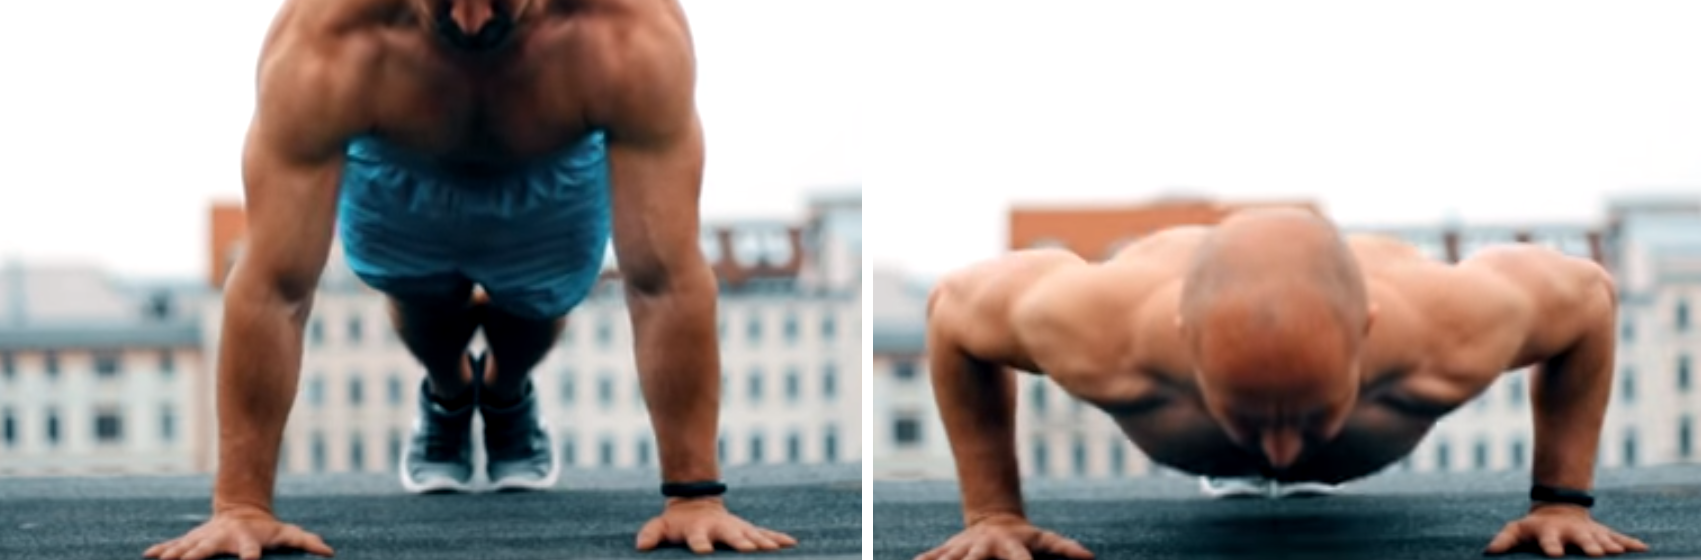 pushup hand position